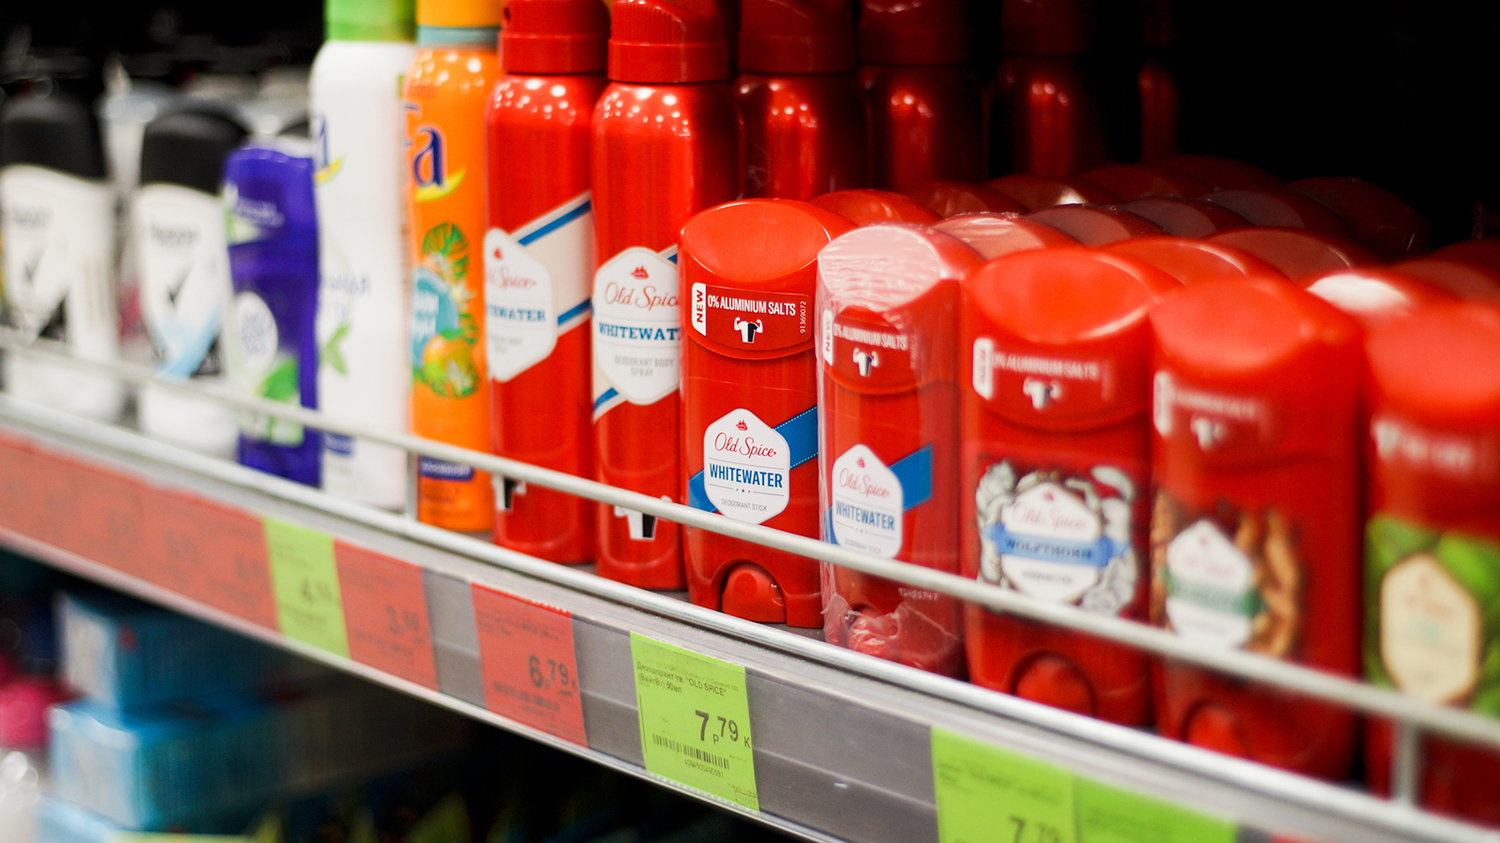 Antiperspirant sprays from Procter & Gamble Co. brands Old Spice and Secret were found to contain the highest levels of benzene among contaminated aerosol products from various manufacturers in a petition filed with the U.S. Food and Drug Administration late Wednesday, Nov. 3, 2021. (Dreamstime/TNS)